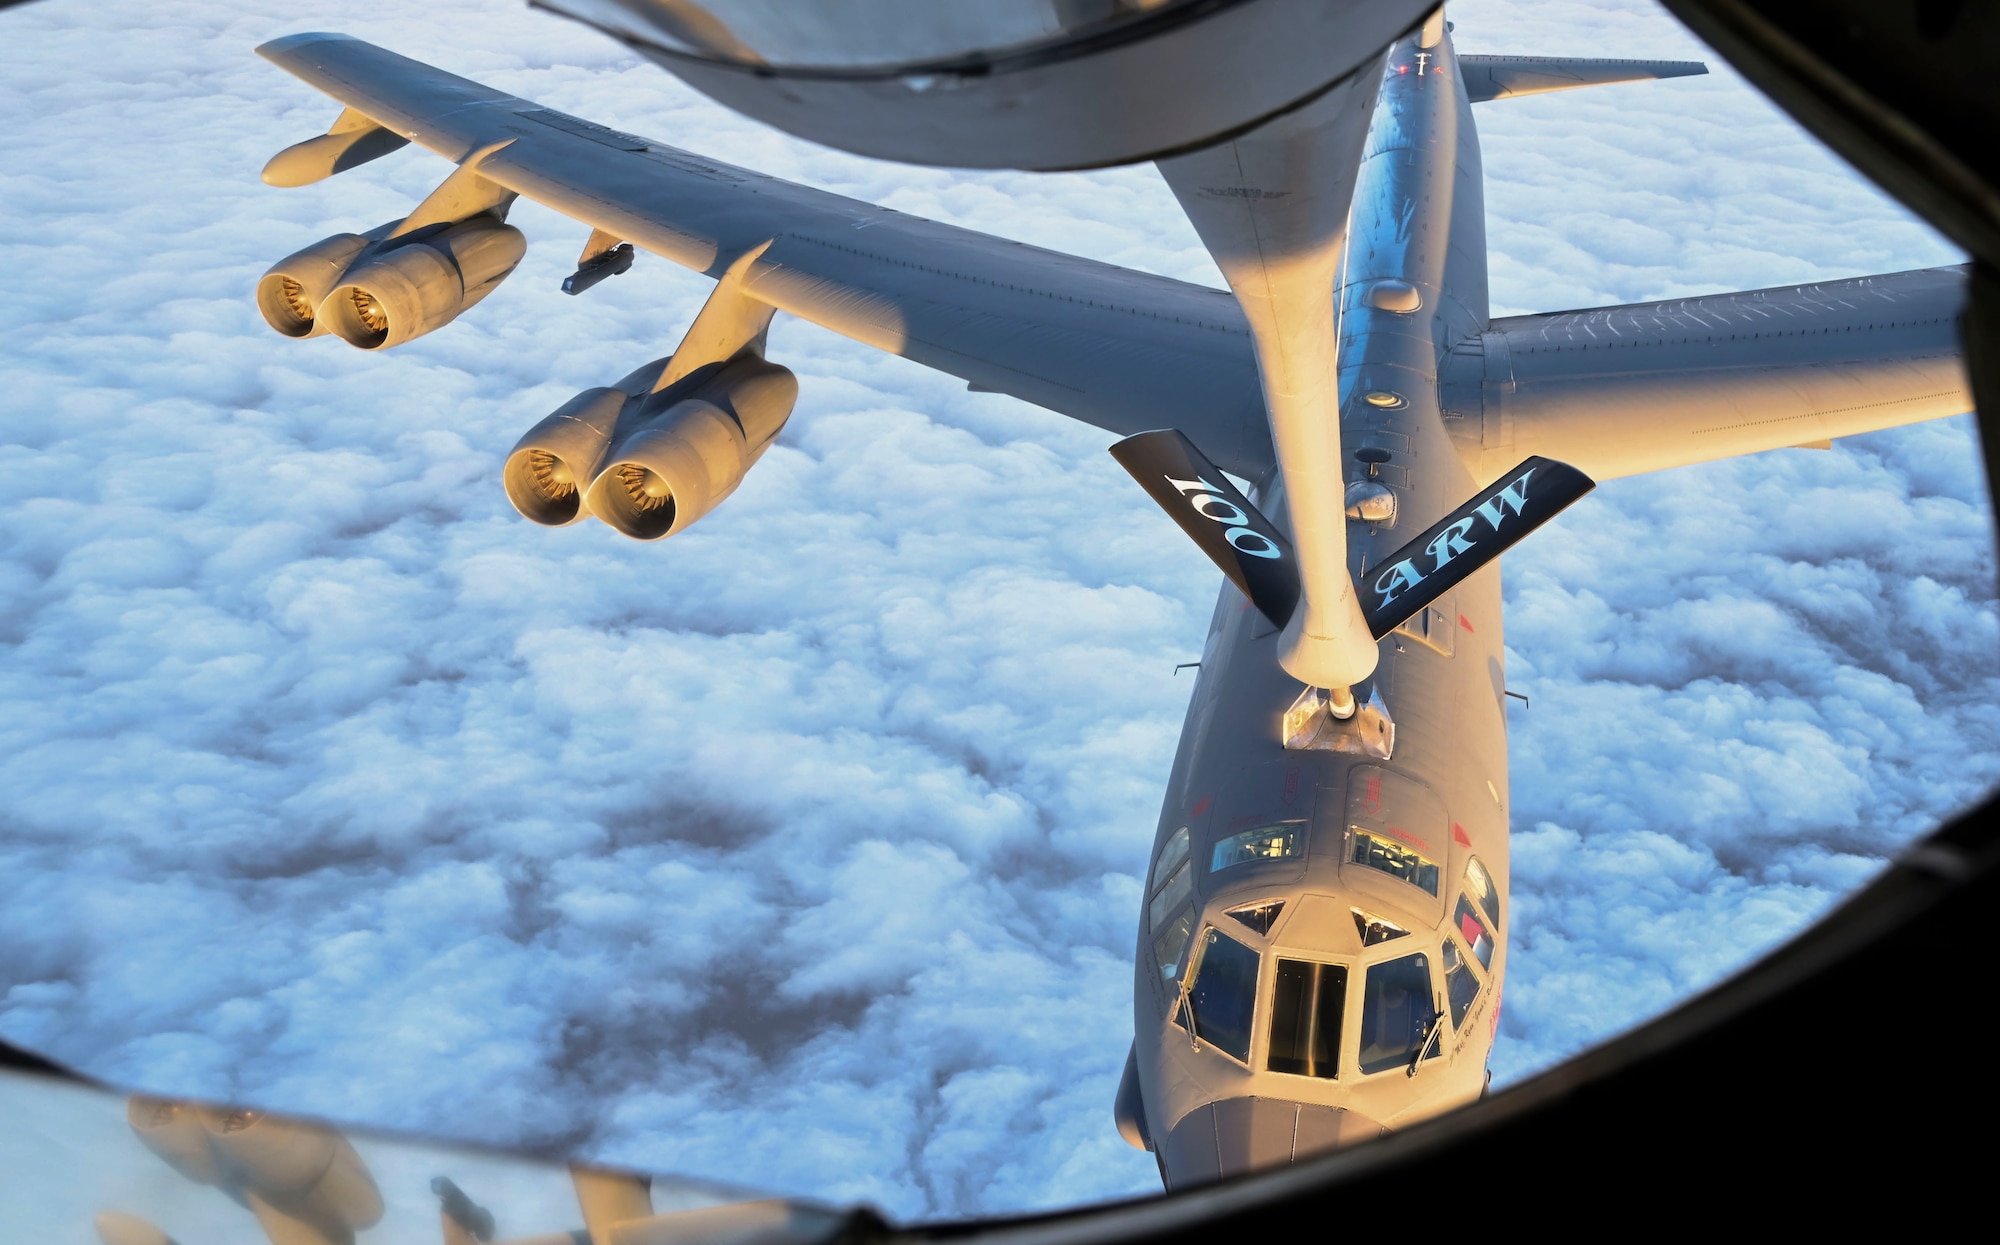 All B-52Hs can be equipped with two electro-optical viewing sensors, forward-looking infrared and advanced targeting pods to augment targeting, battle assessment and flight safety, further improving its combat ability.